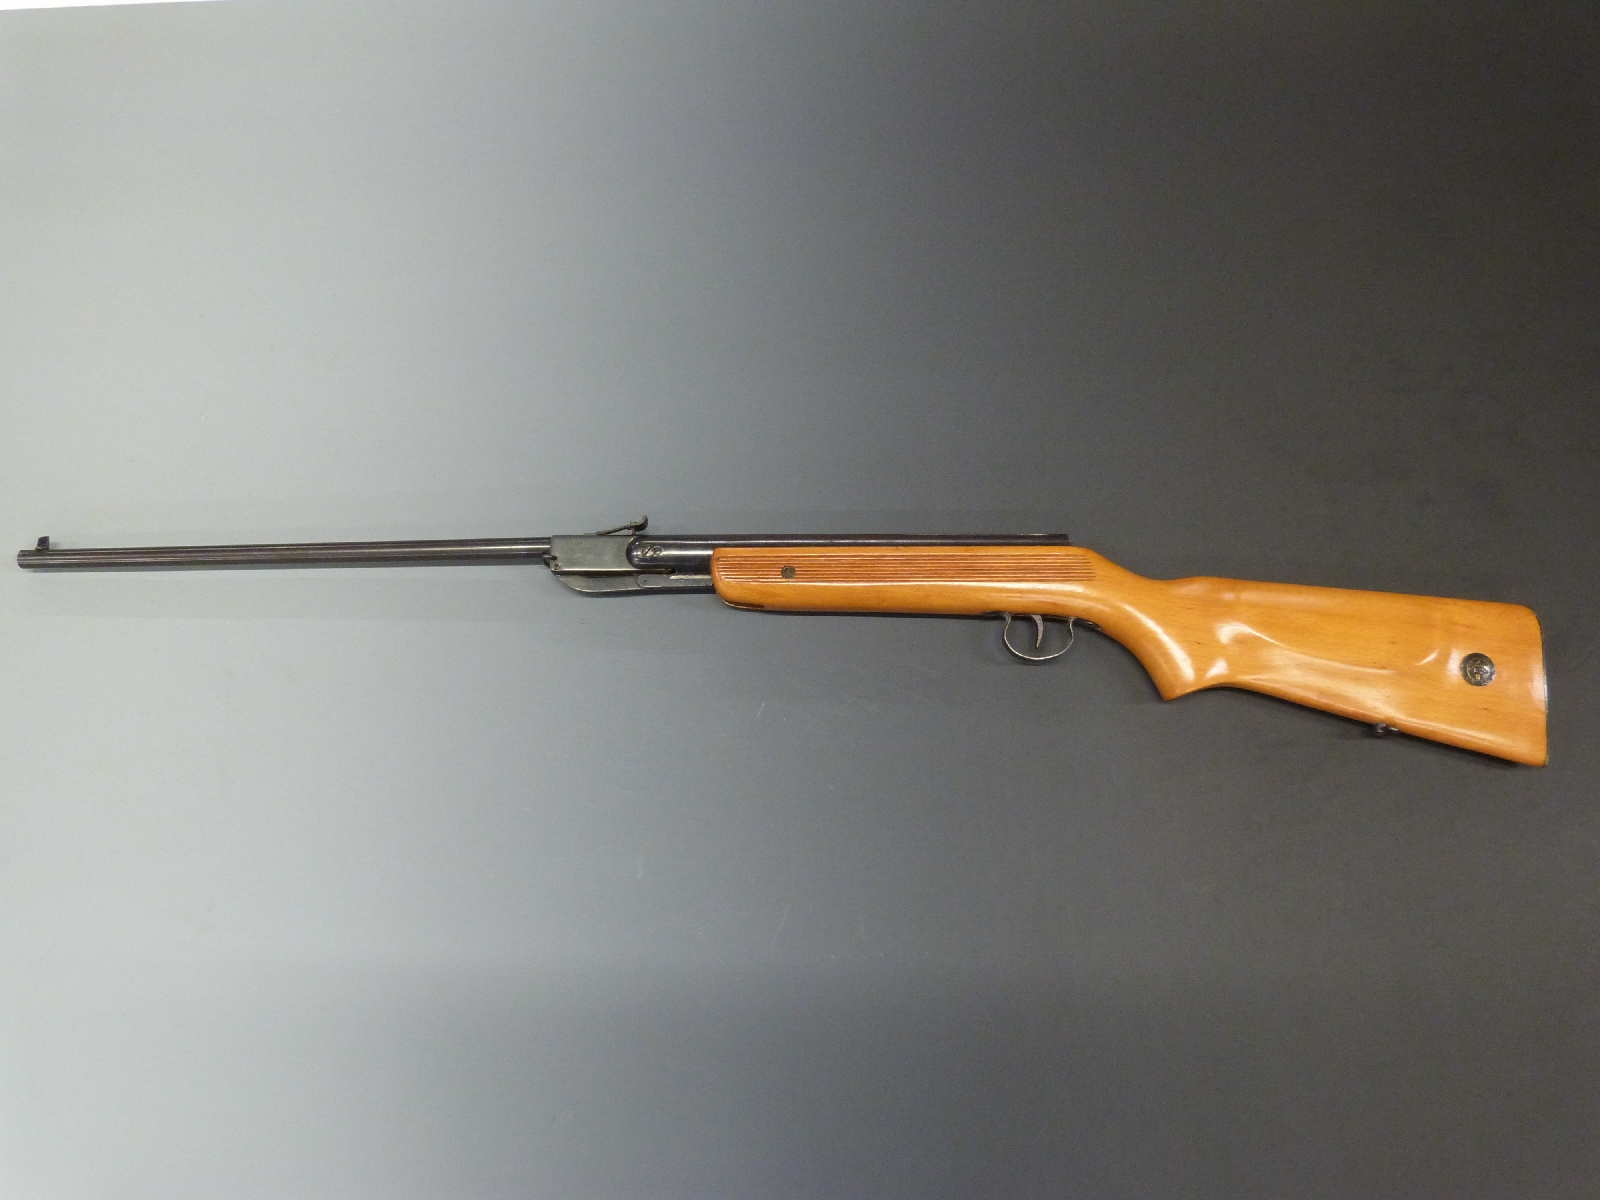 Relum Telly .22 air rifle with semi-pistol grip, raised cheek piece, sling suspension mounts and - Image 4 of 6